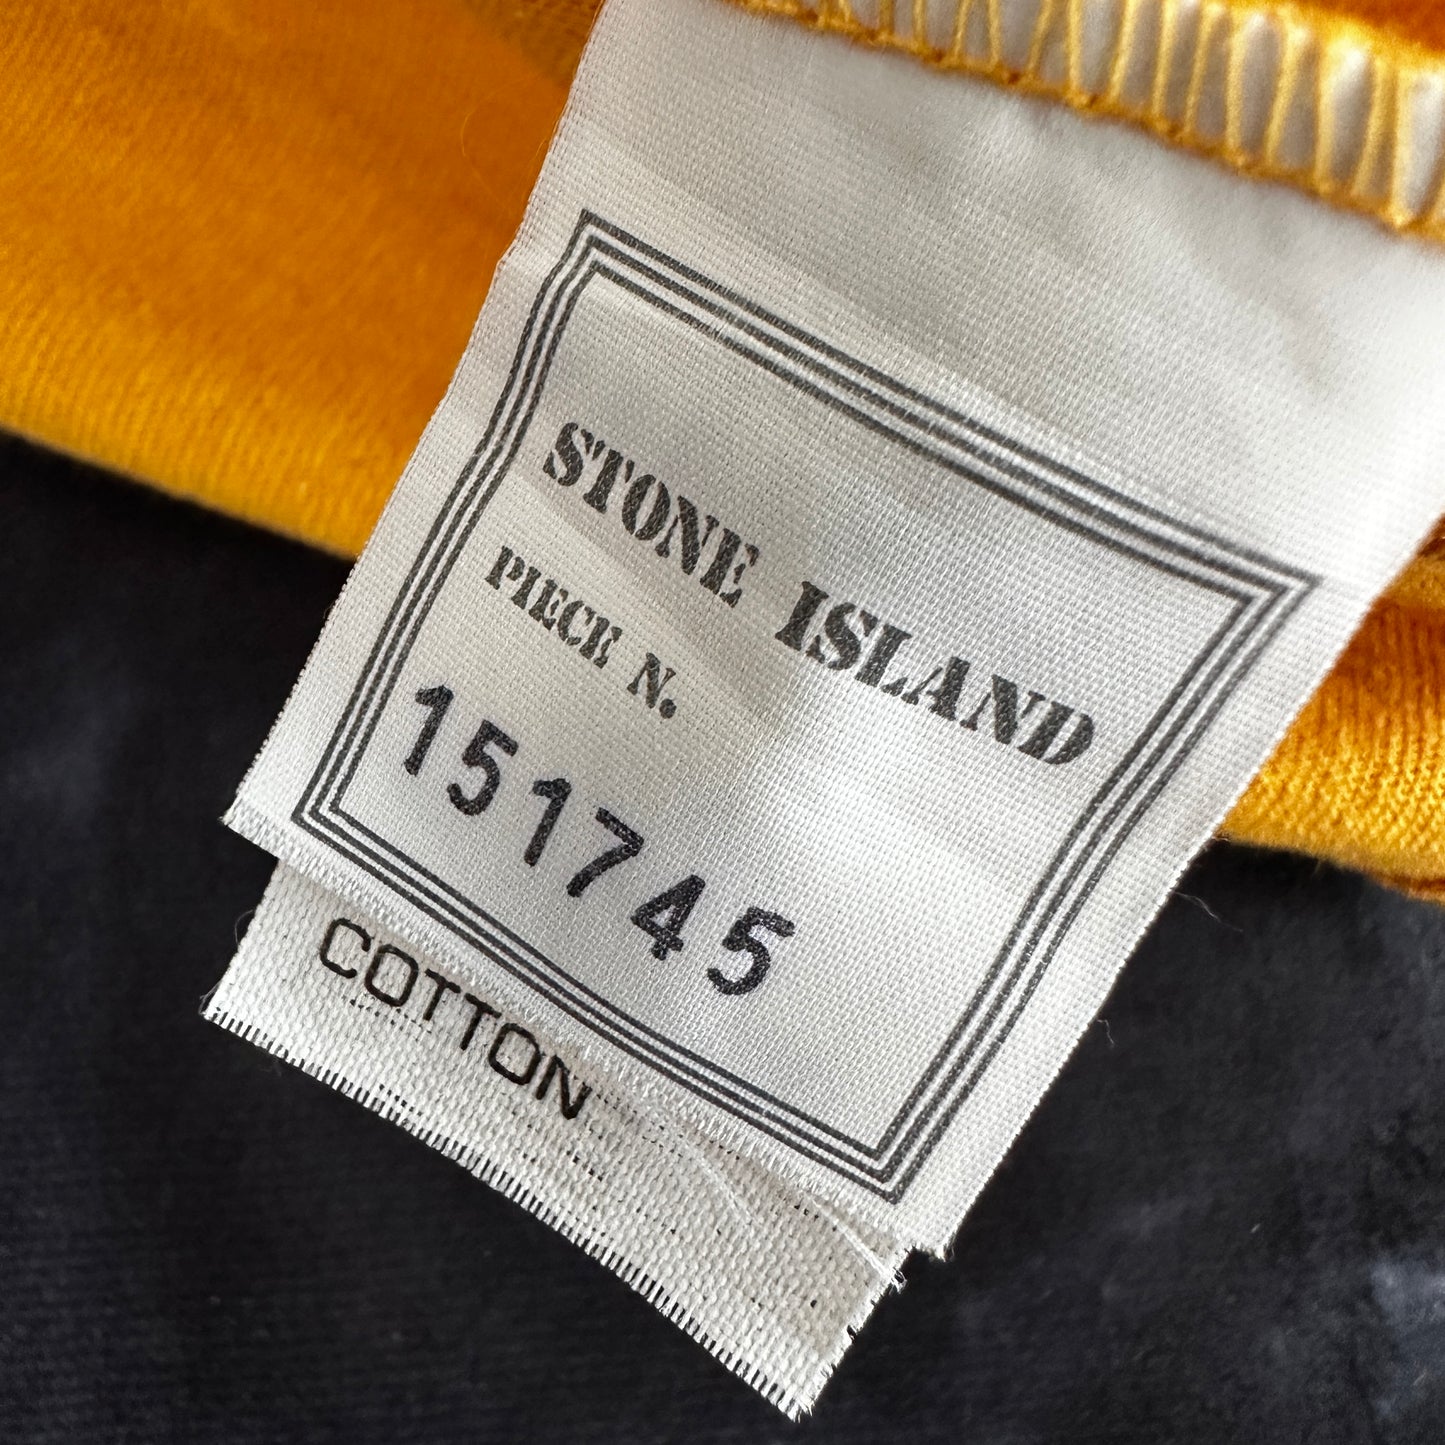 Stone Island Vintage 80s Henley T-Shirt - M - Made in Italy